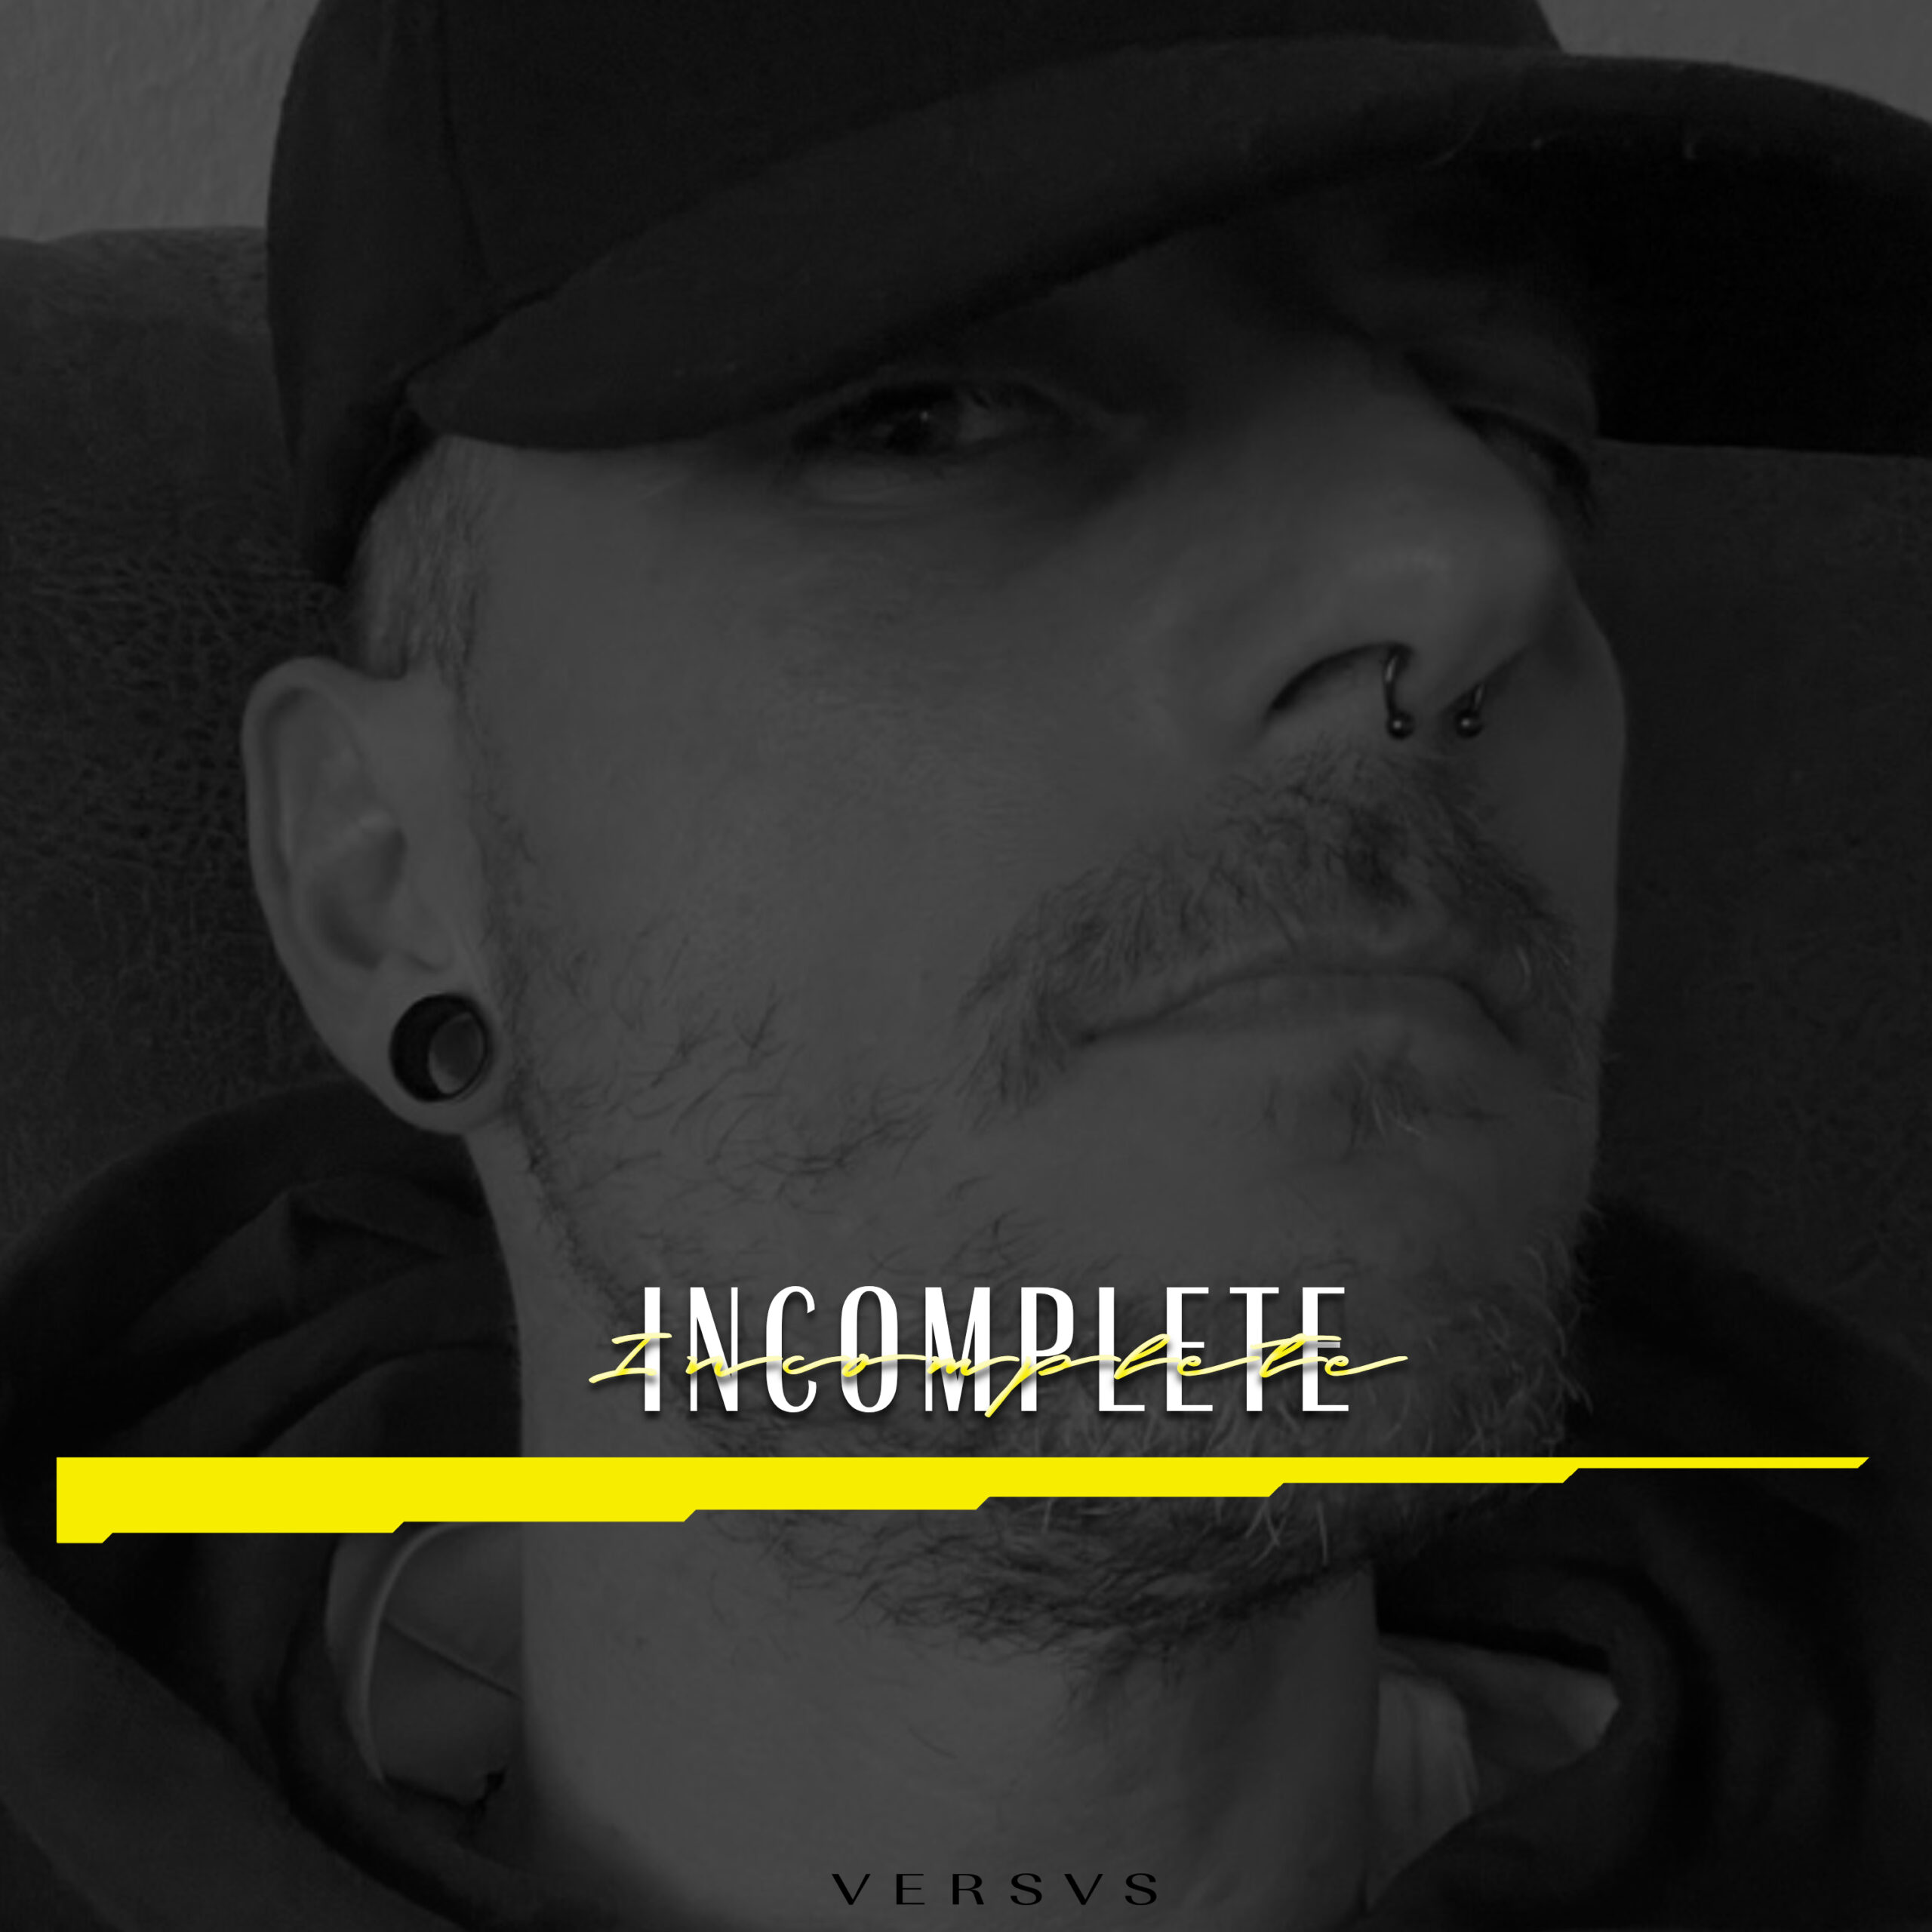 Cover next album by Tommy Warzecha INCOMPLETE starts 9.6.23 worldwide